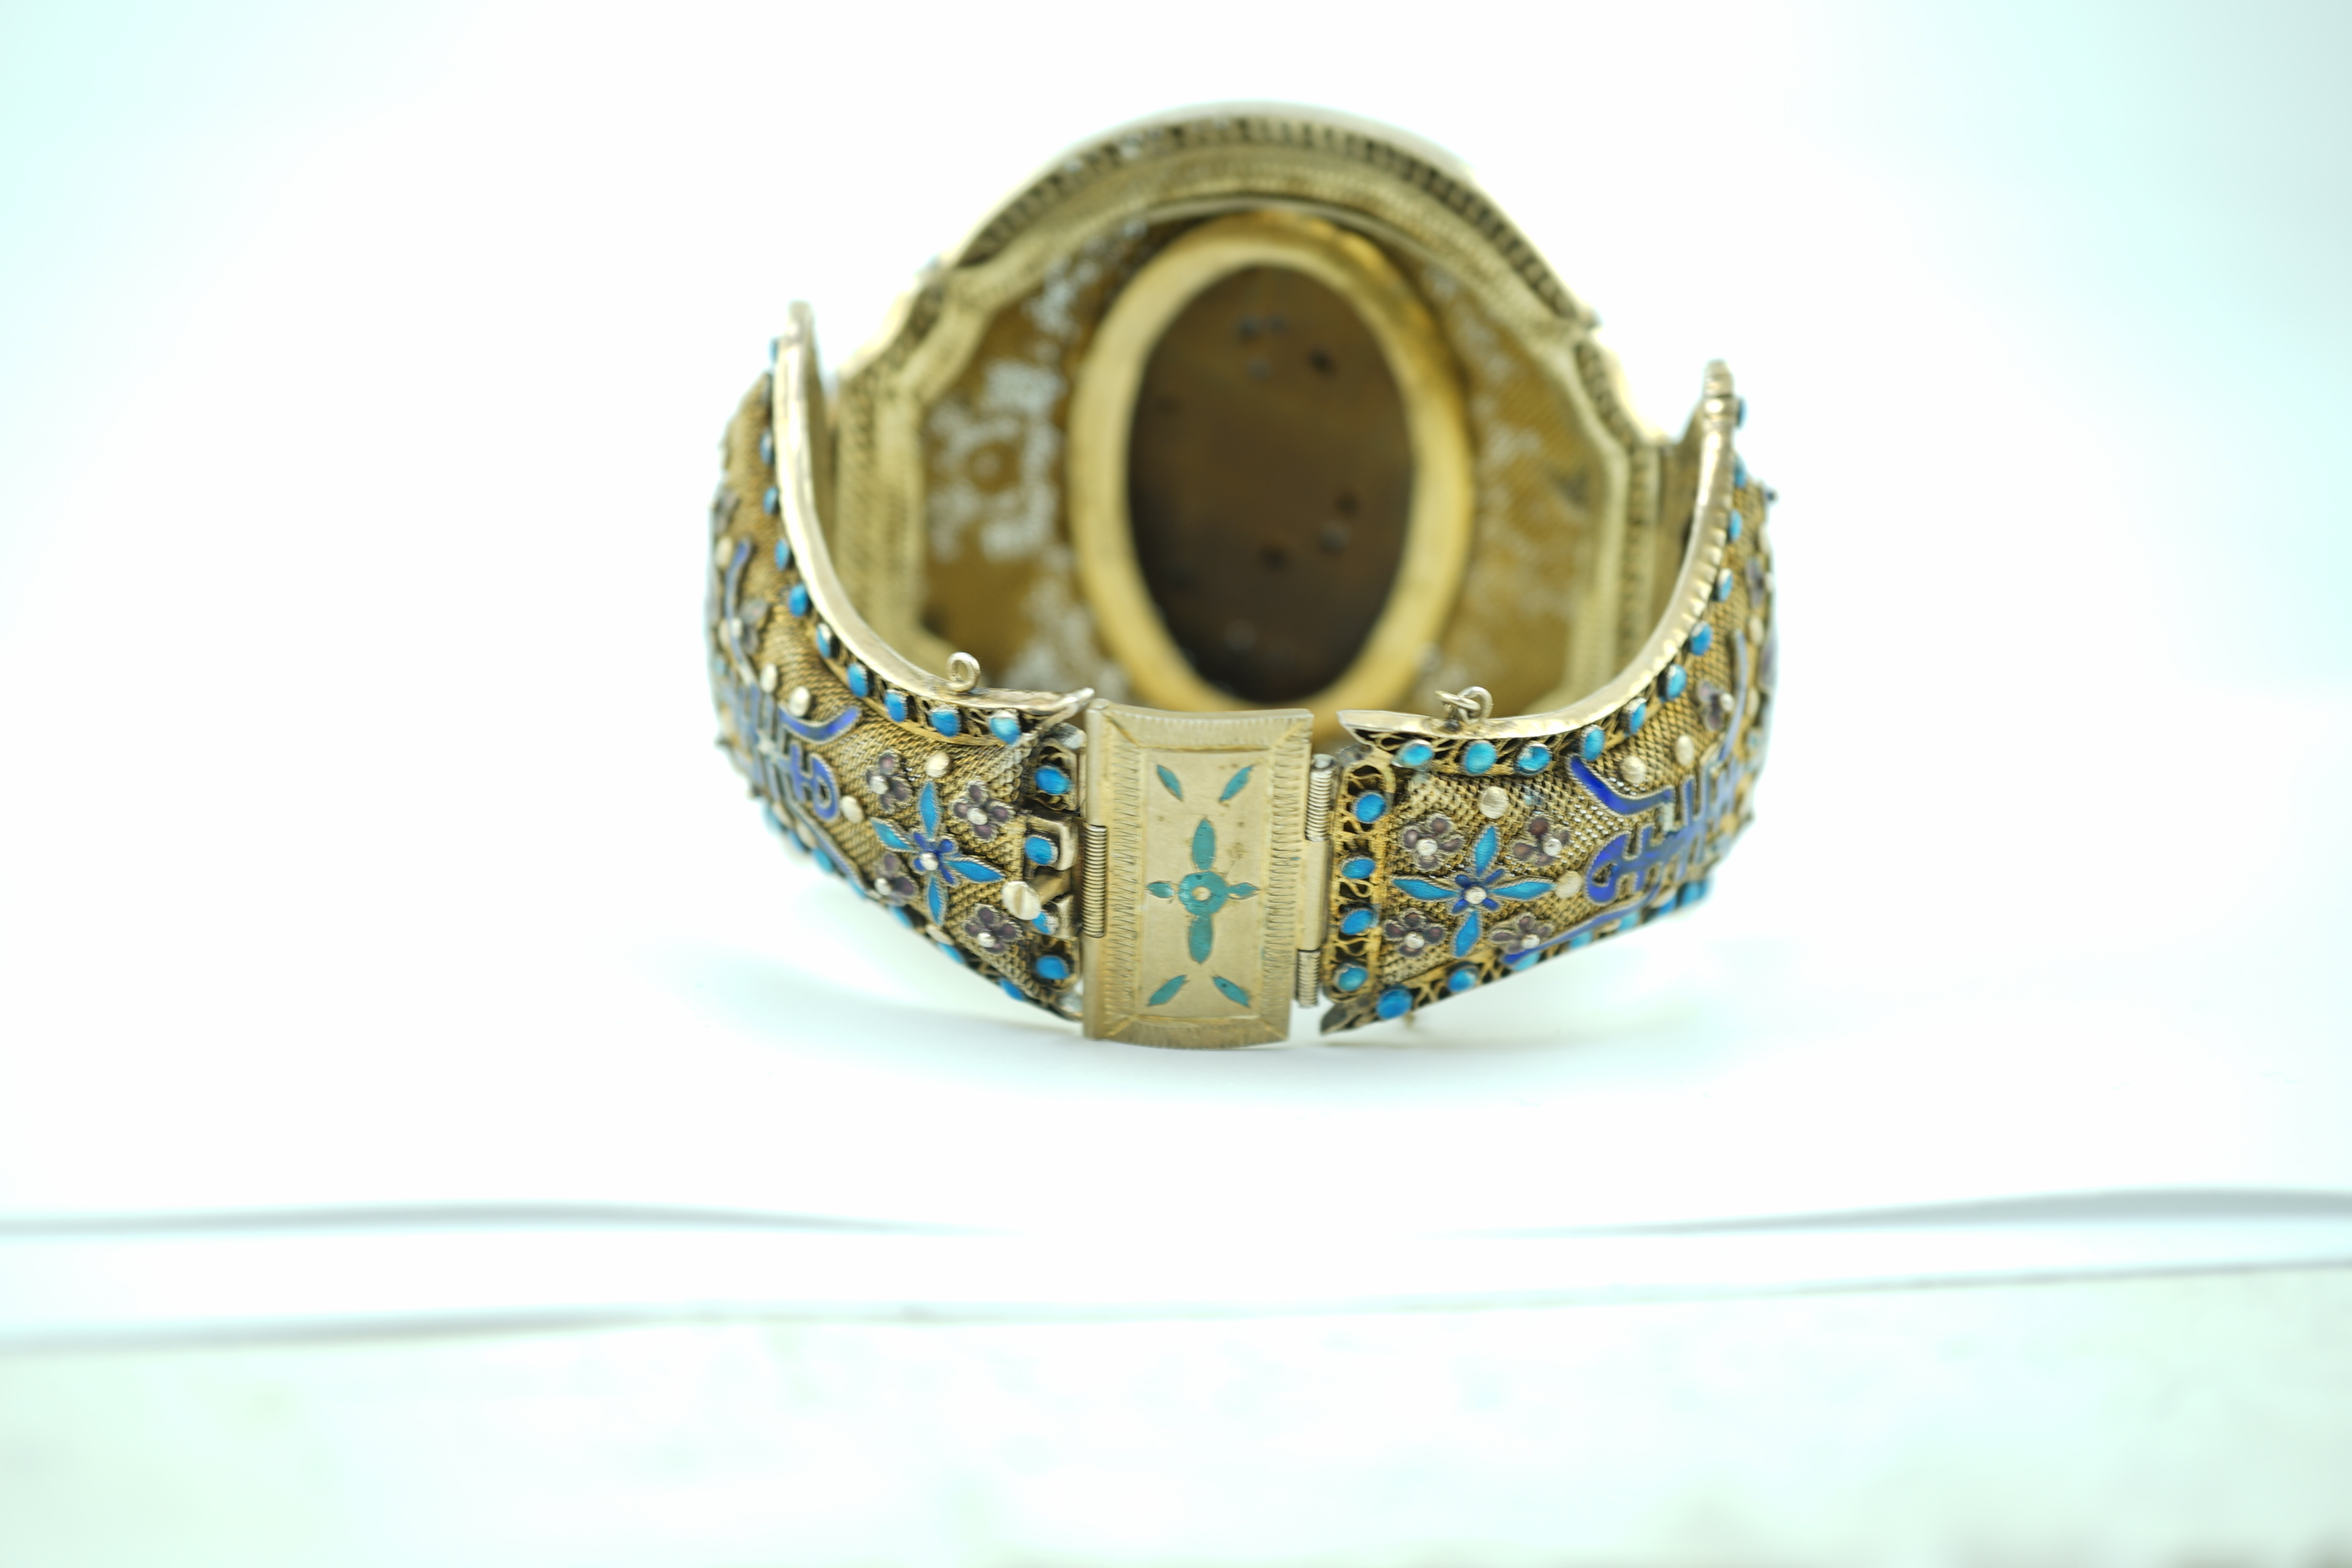 A Chinese silver-gilt, enamel and tiger's-eye bracelet, early 20th century